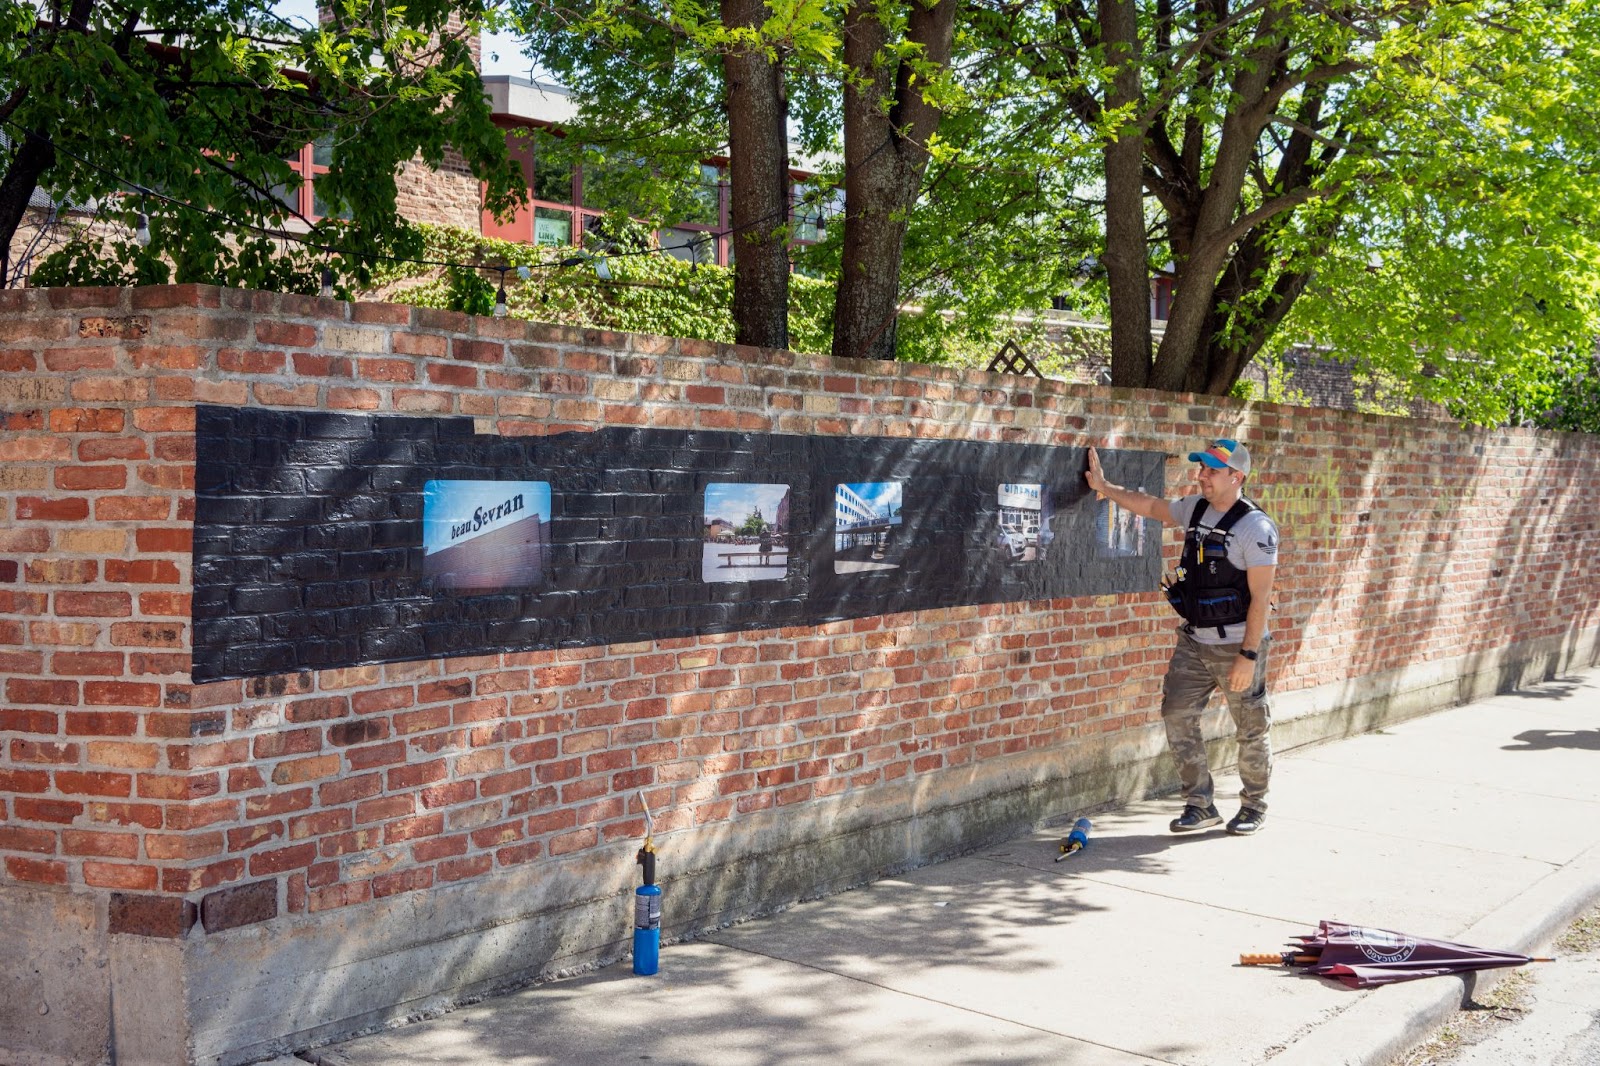 Image: Installation view, RER B-ANLIEUS,2021. A man just finished adhering a poster of Assia Labbas’ RER B-ANLIEUS onto a brick wall along the outer perimeter of Experimental Station, Woodlawn. The piece looks like a strip of film for a Kodak carousel projector, with vignette-style photographs from different locations in Paris along the RER-B train line as the slides. Courtesy of Villa Albertine.